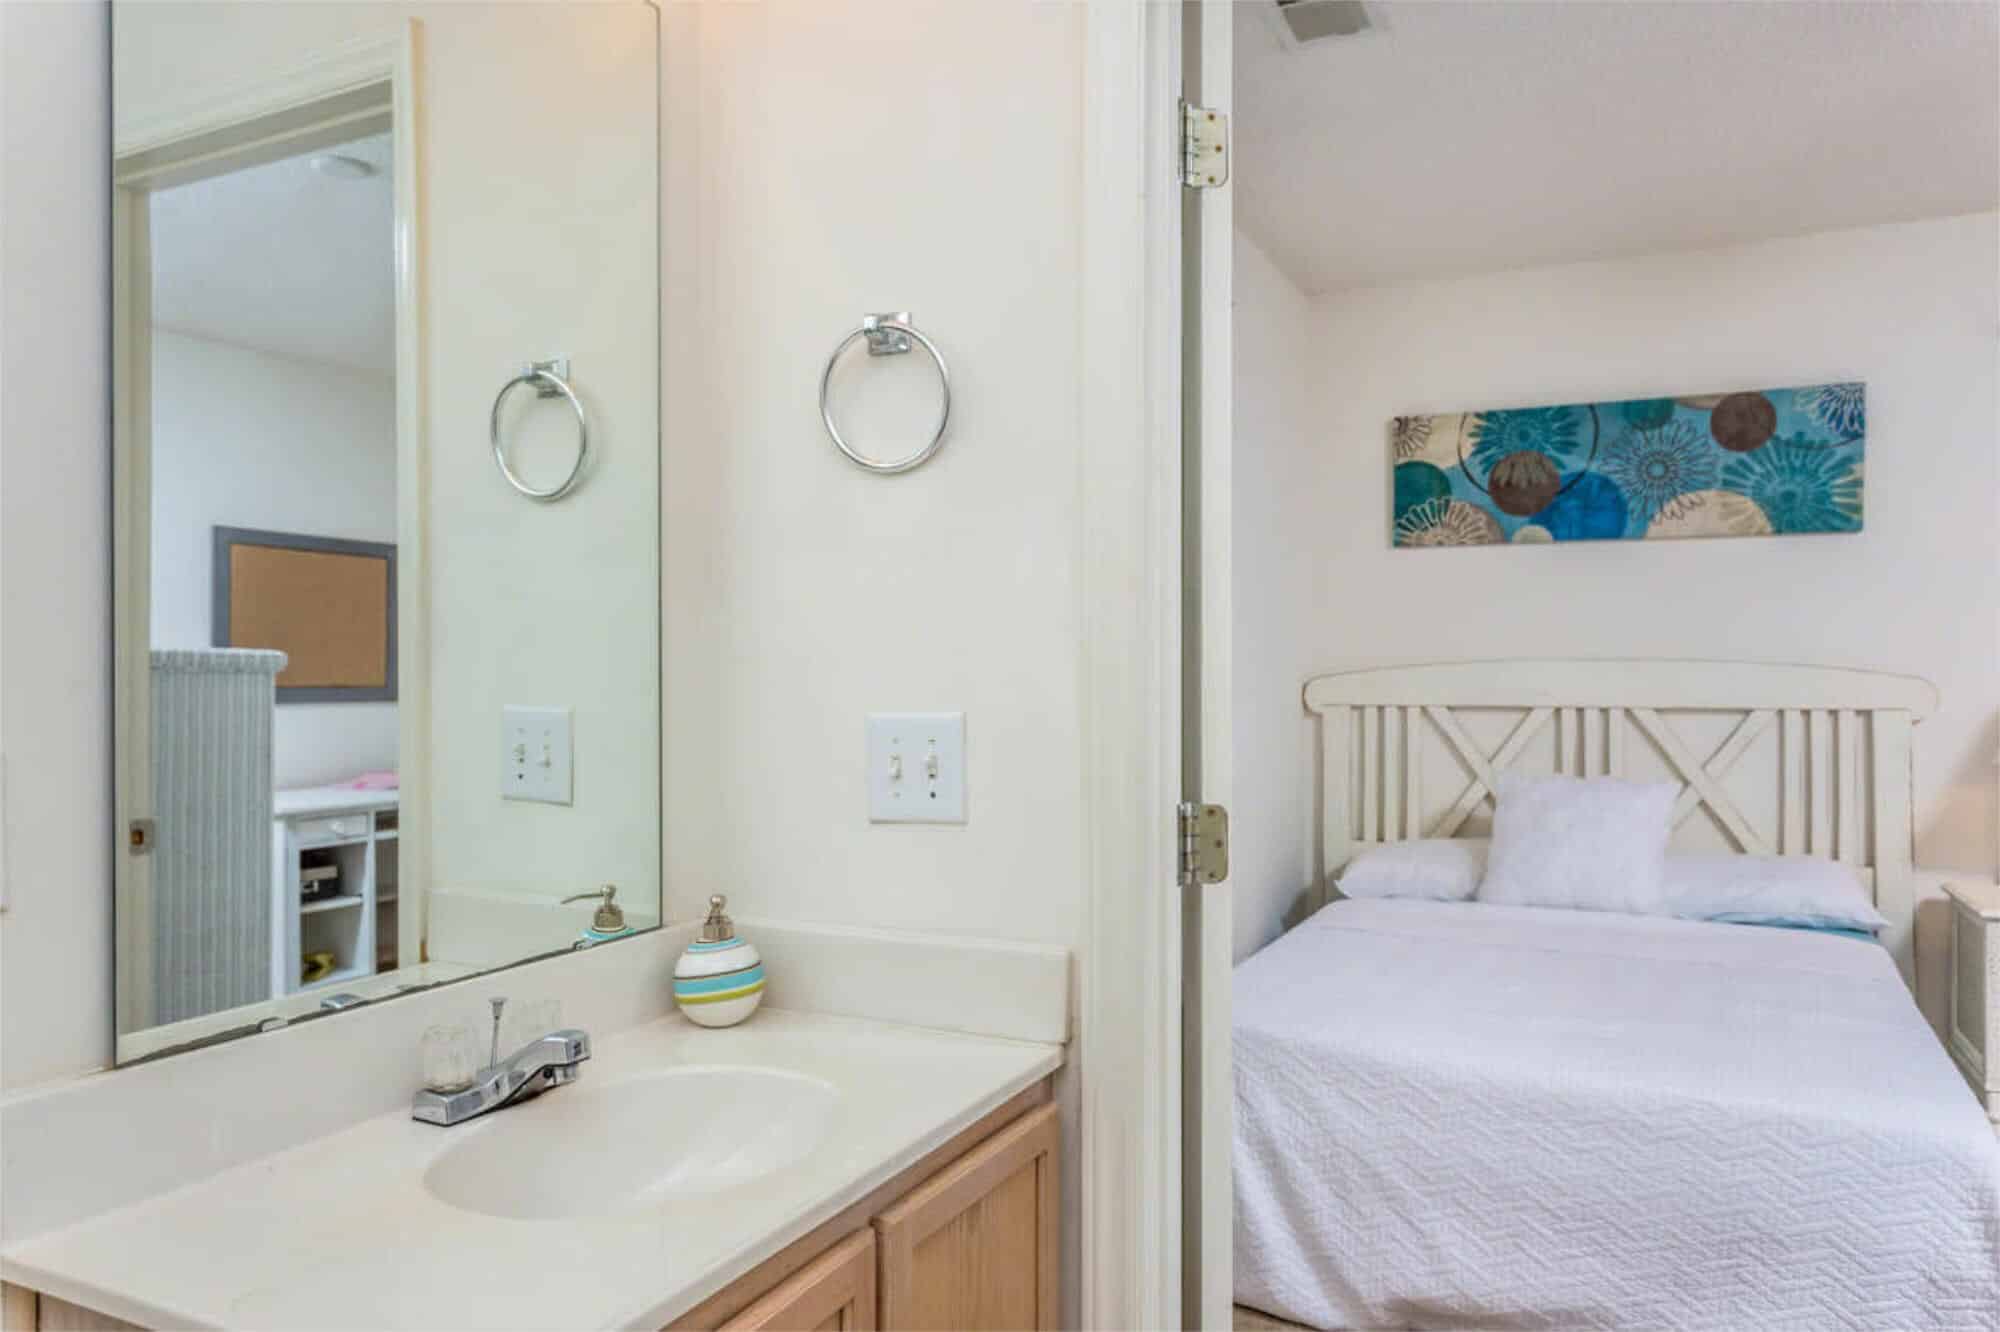 raleigh off campus apartments near nc state university private bathroom private bedroom